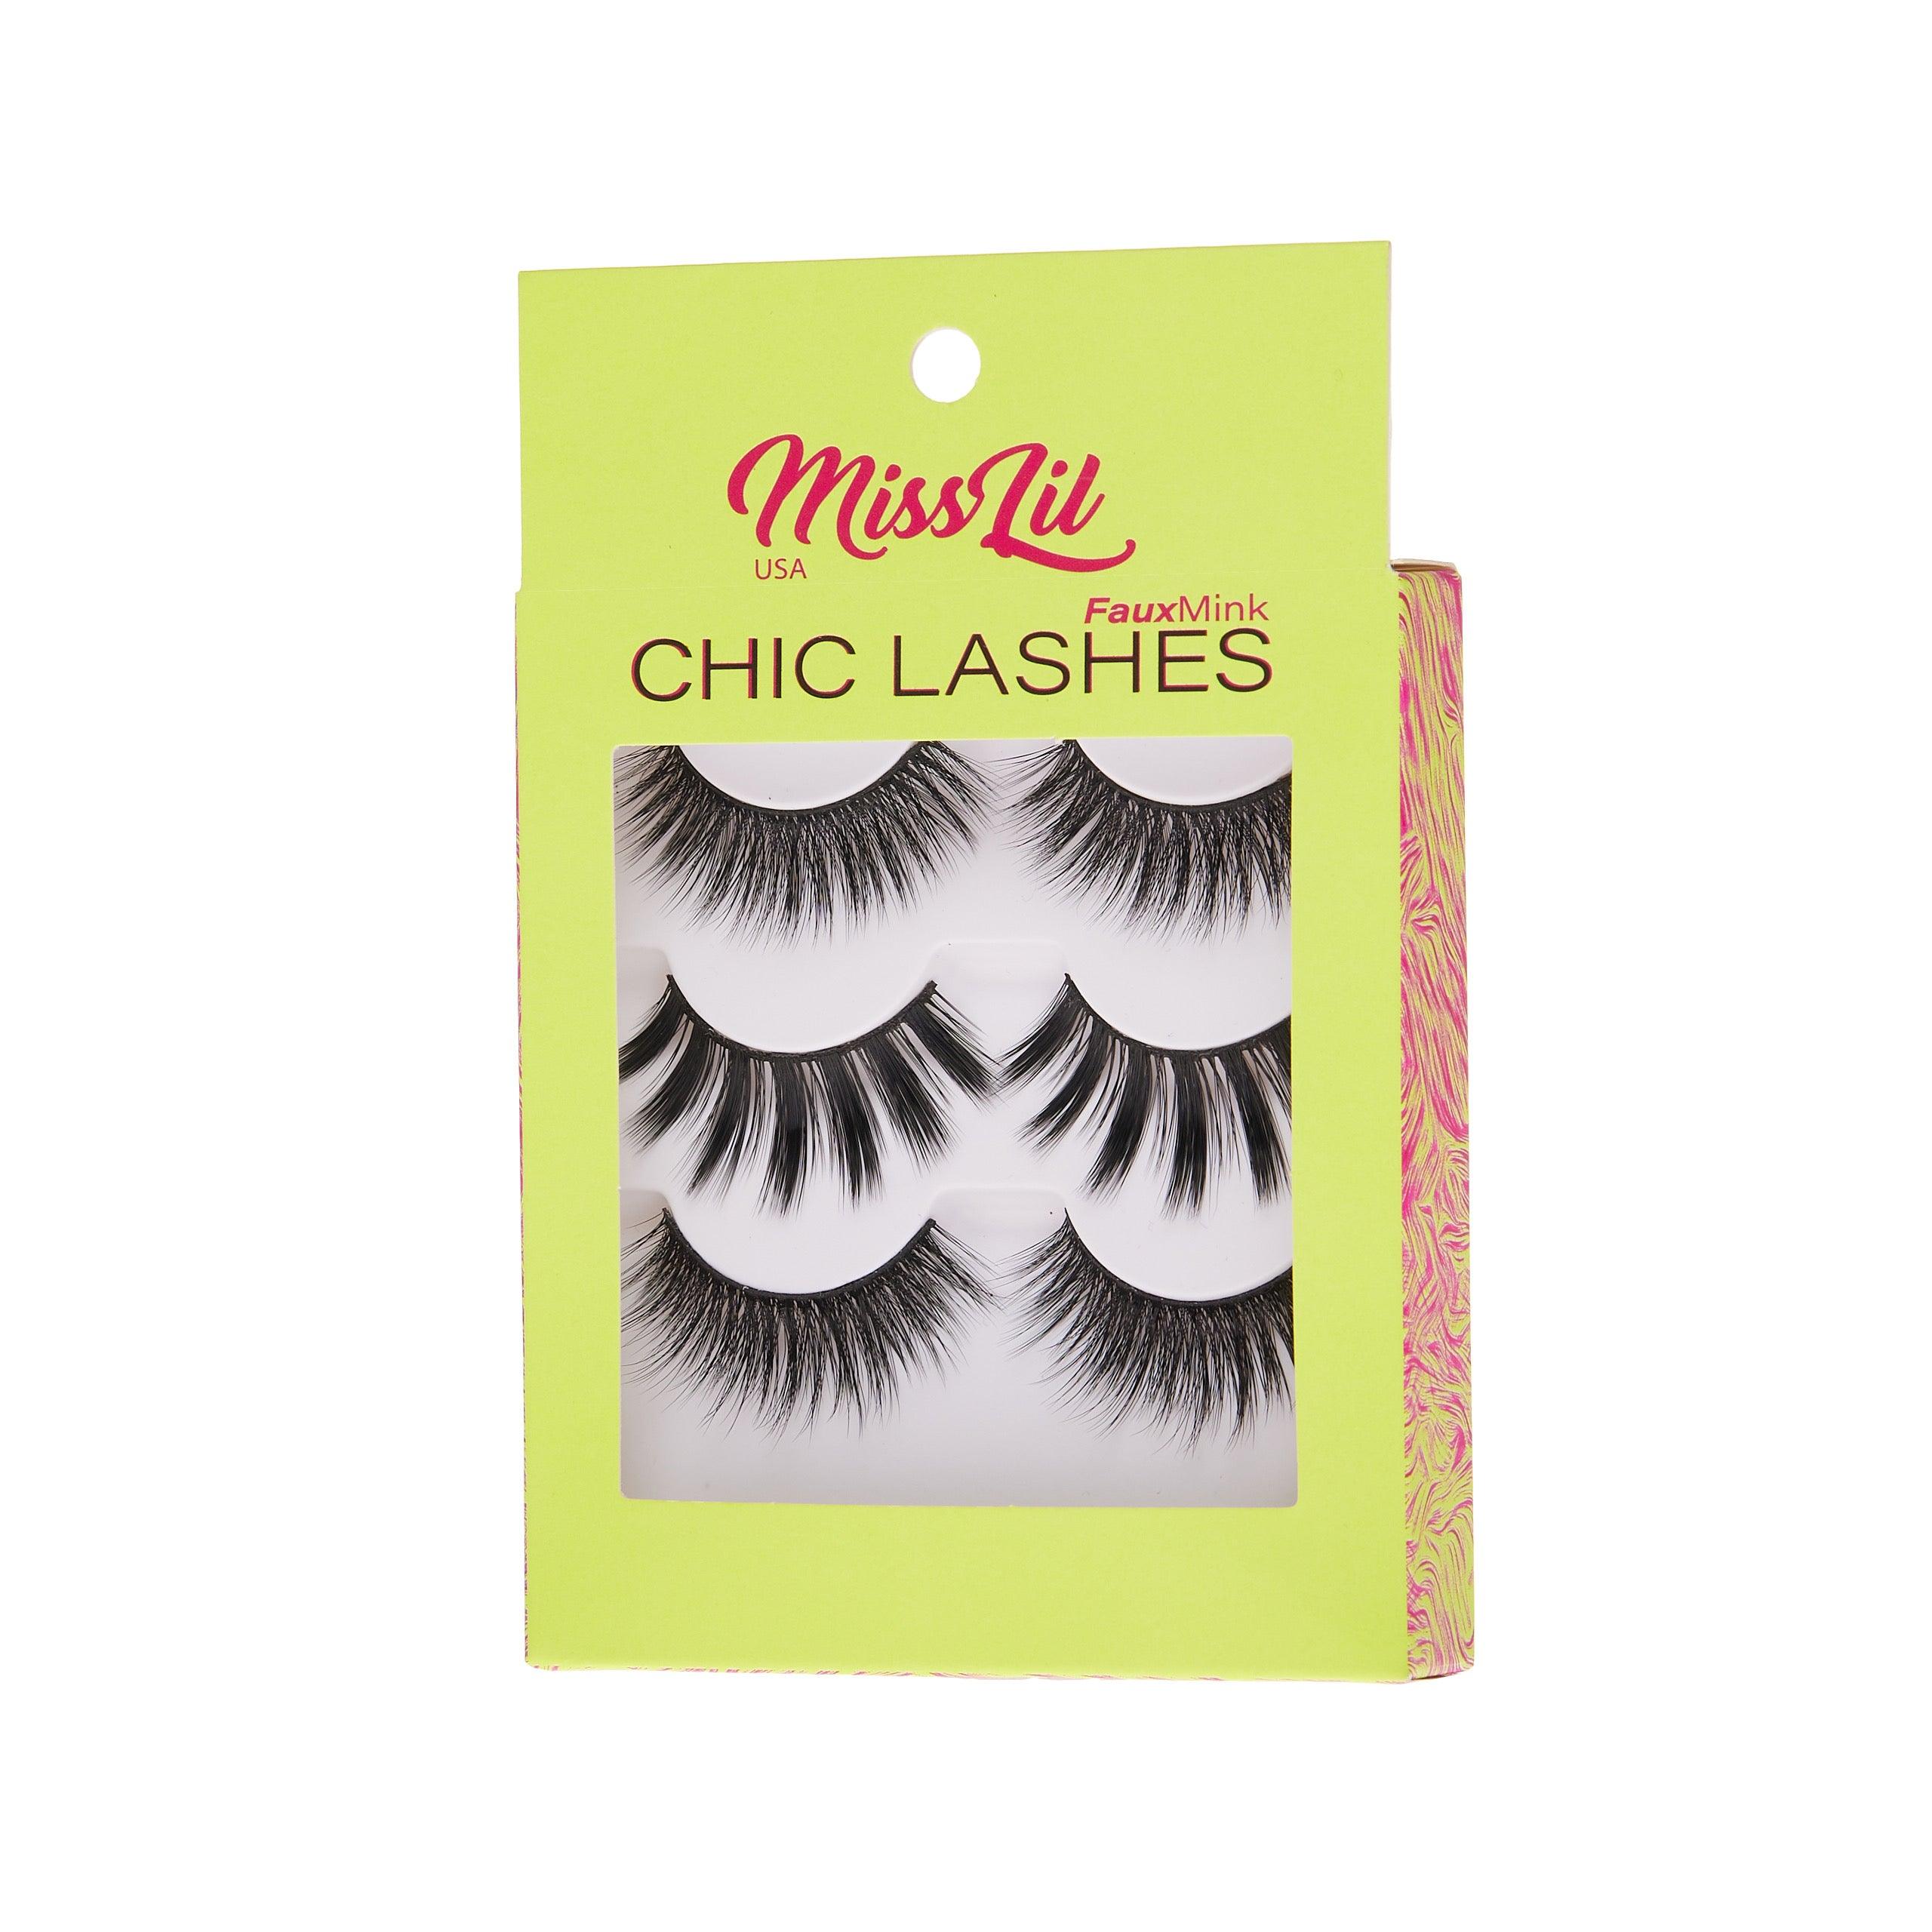 3-Pair Faux Mink Eyelashes - Chic Lashes Collection #2 - Pack of 3 - Miss Lil USA